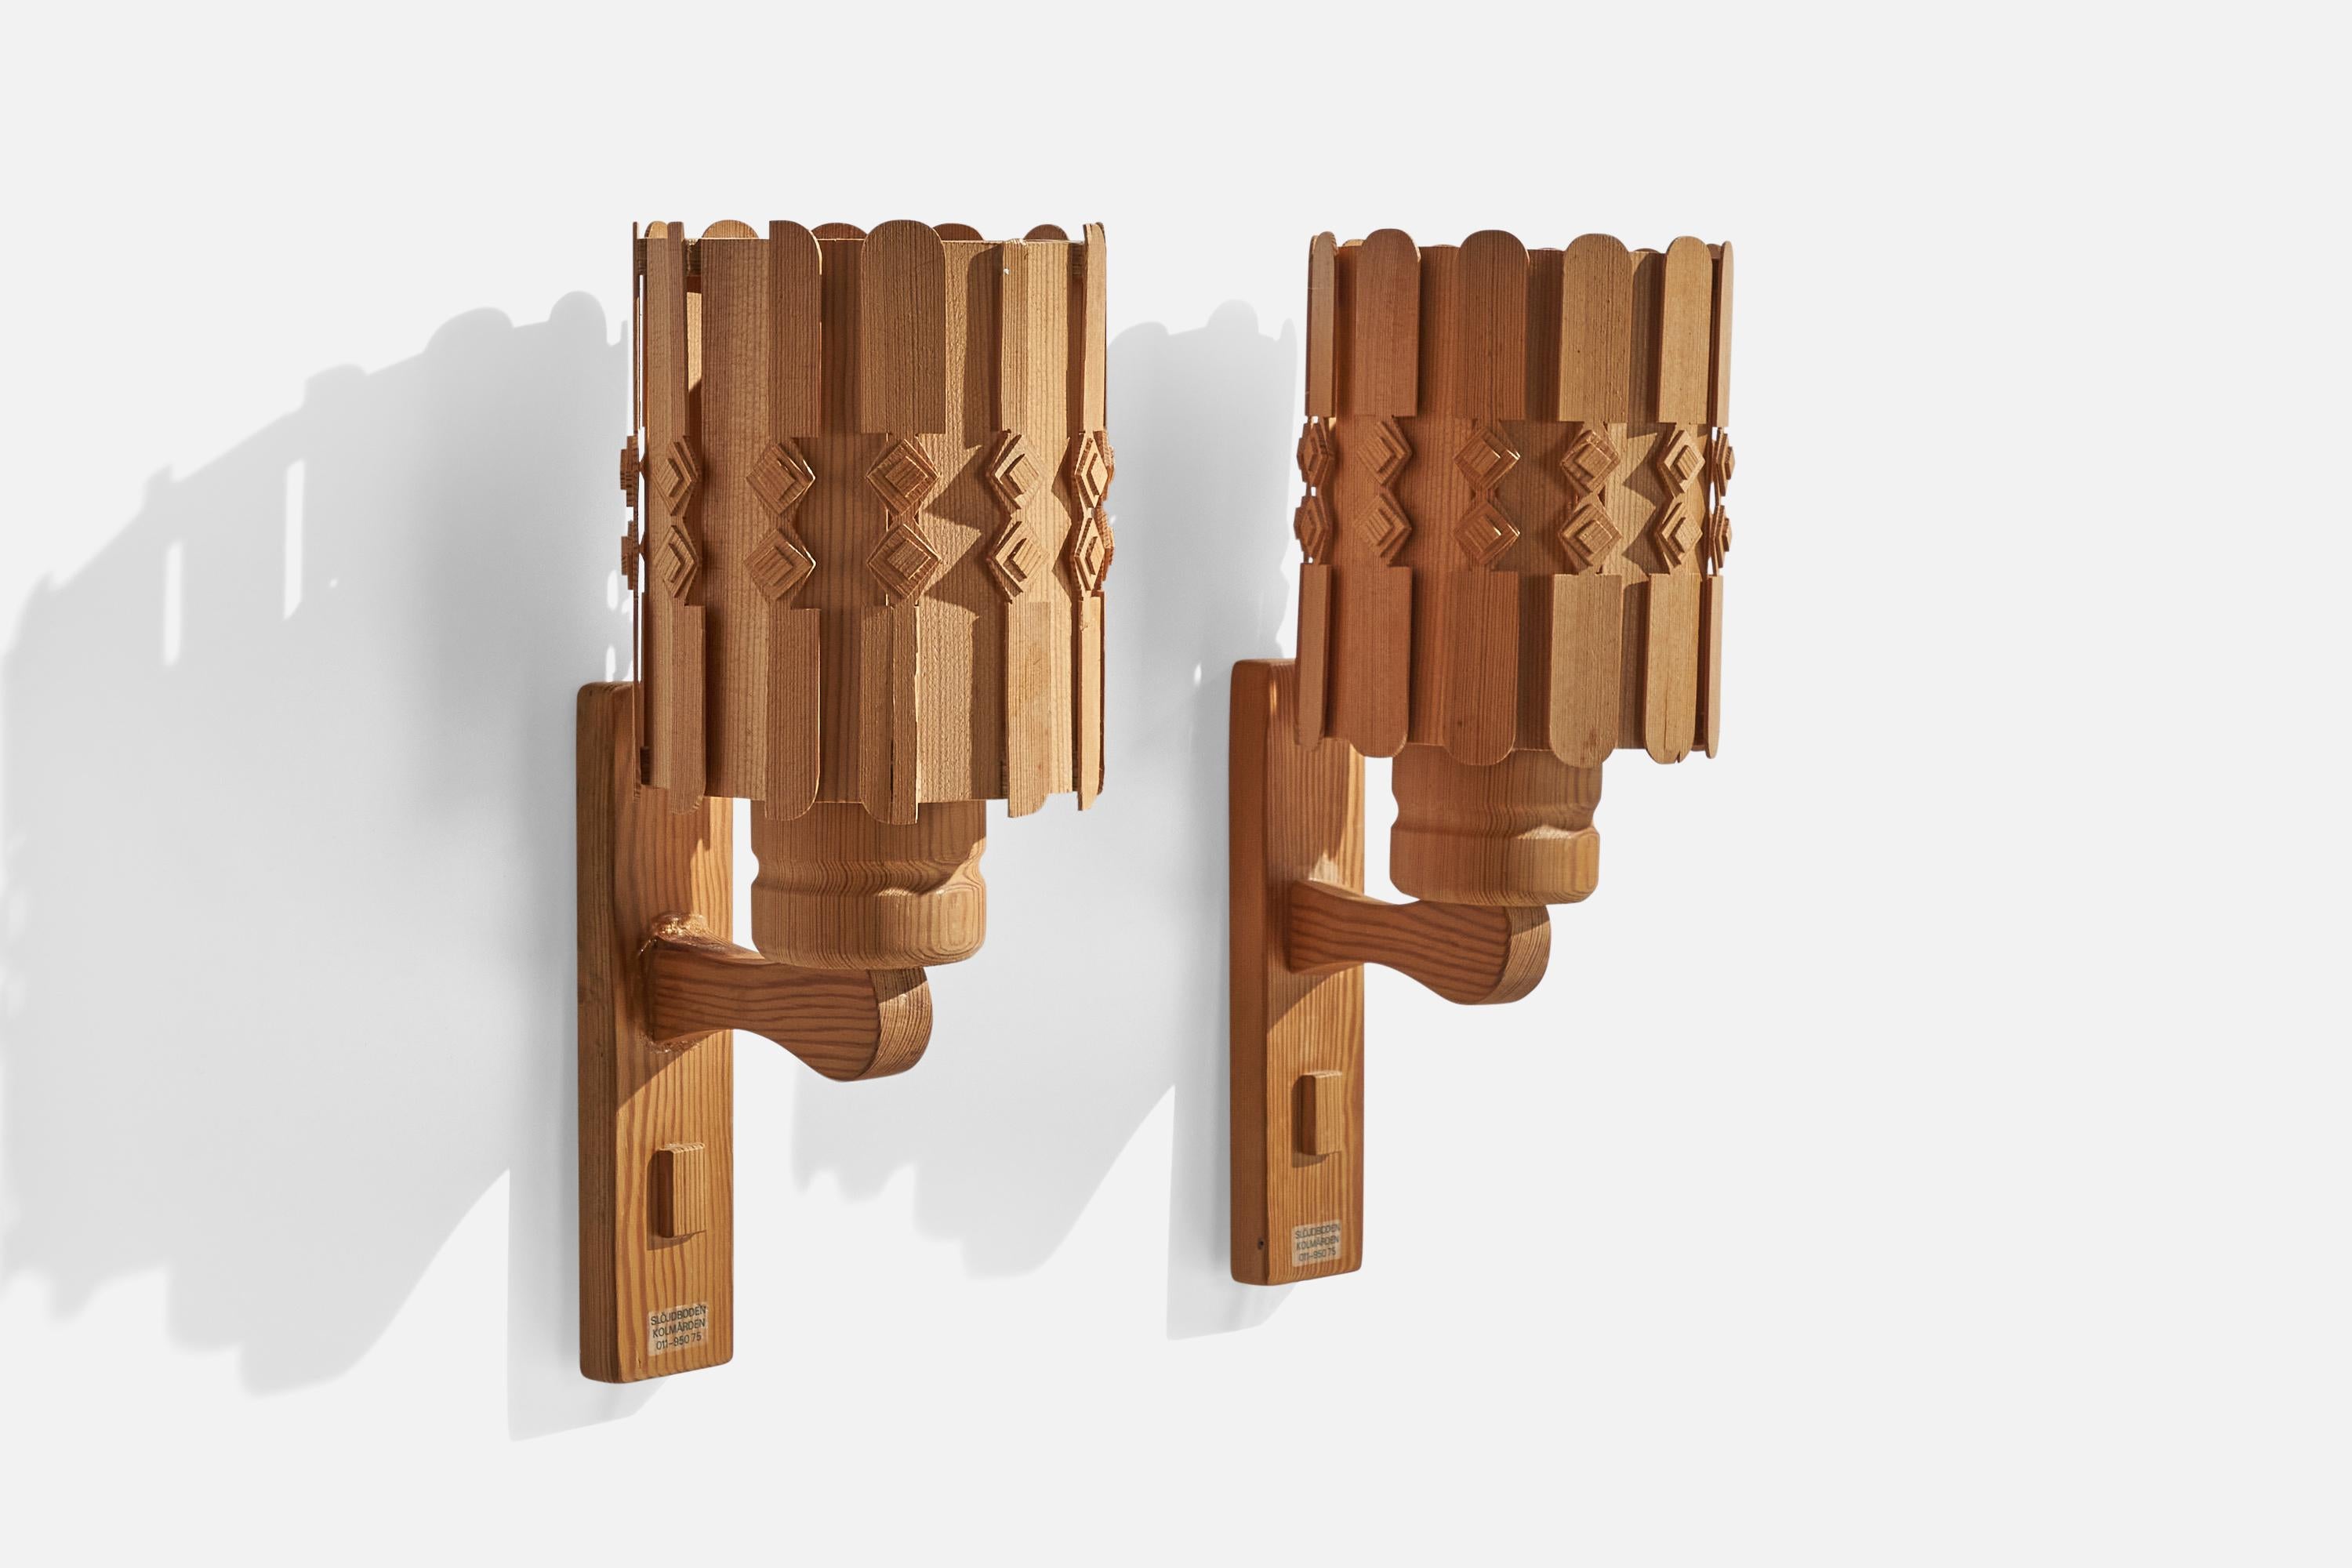 A pair of pine and pine veneer wall lights designed and produced by Slöjdboden Kolmården, Sweden, 1970s.

Overall Dimensions (inches): 13” H x 5.25” W x 6.25” D
Back Plate Dimensions (inches): 7.75” H x 2” W x .75” D
Bulb Specifications: E-26